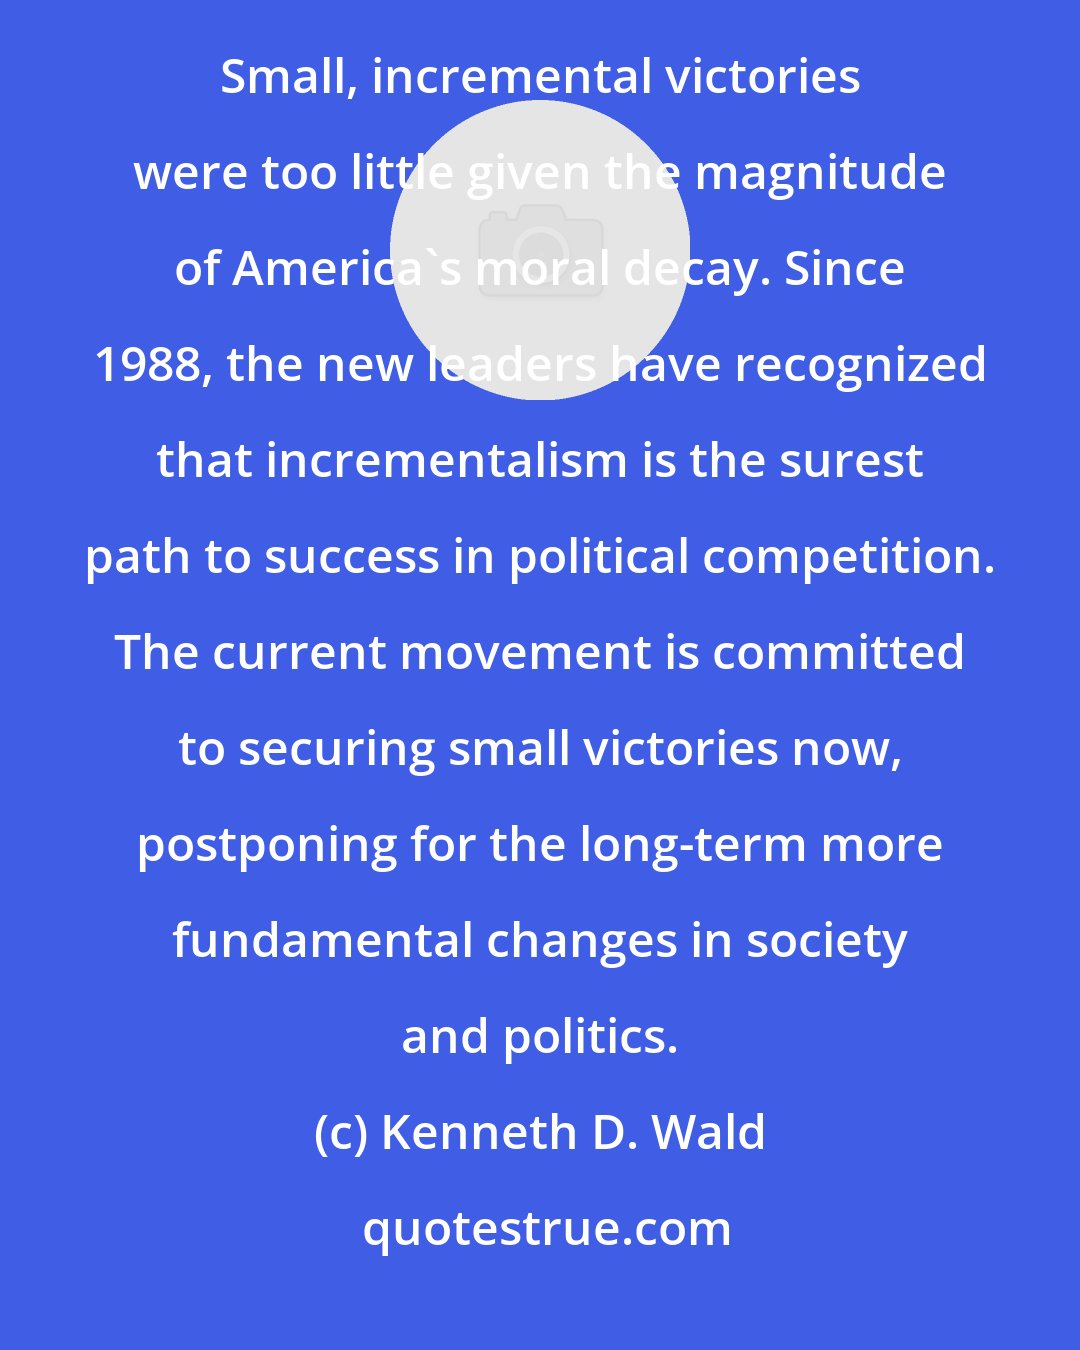 Kenneth D. Wald: Incrementalism: In the first generation, the goal of the movement was wholesale social and cultural transformation. Small, incremental victories were too little given the magnitude of America's moral decay. Since 1988, the new leaders have recognized that incrementalism is the surest path to success in political competition. The current movement is committed to securing small victories now, postponing for the long-term more fundamental changes in society and politics.